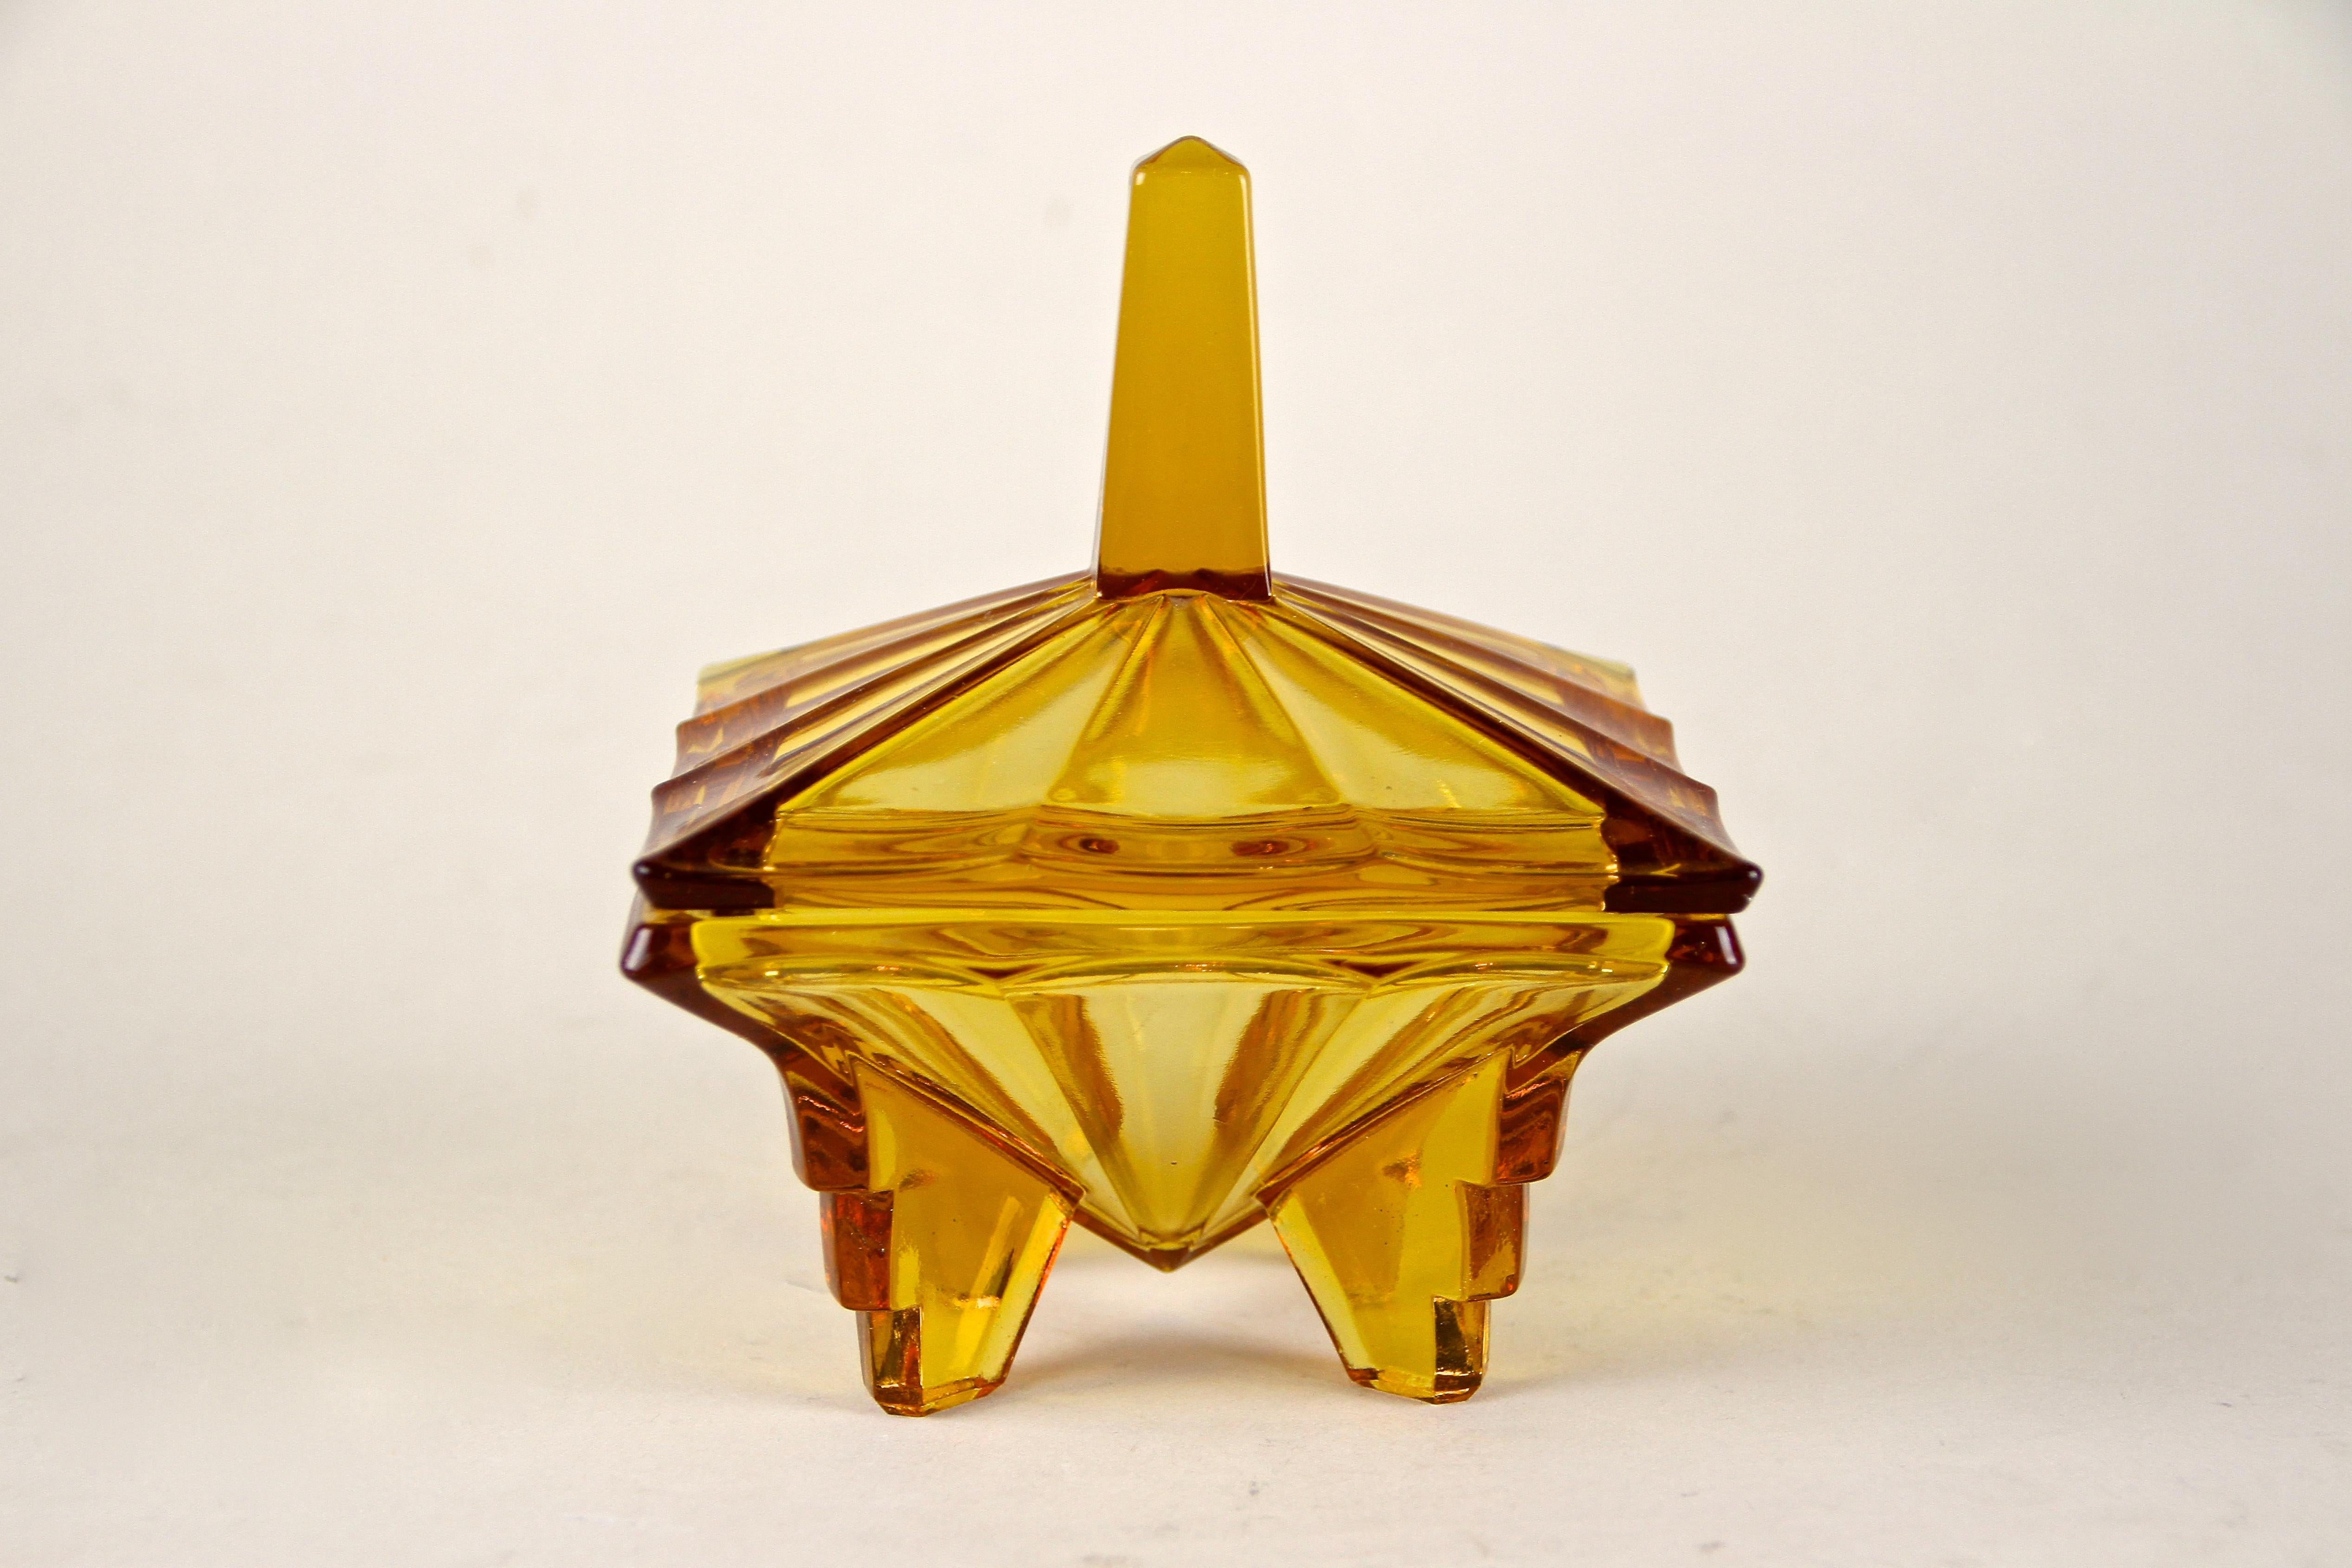 Exclusive Art Deco glass box with lid from the period in Austria, circa 1920. This highly decorative, amber colored pressed glass box impresses with an absolute unique shape, reflecting the famous Art Deco form language at its best. A great designed